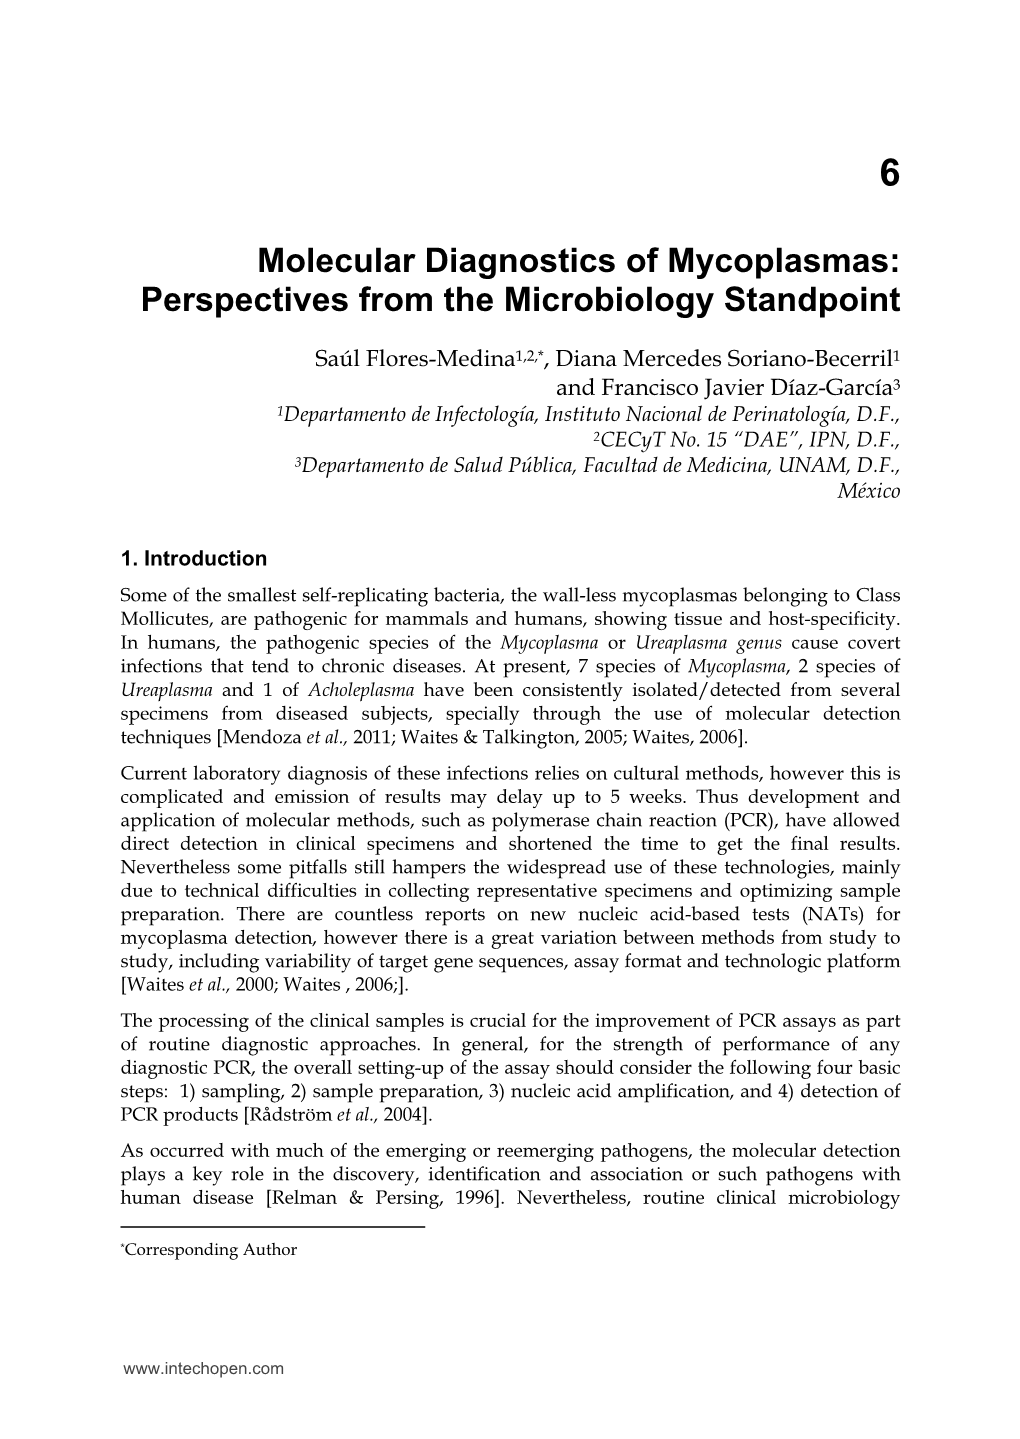 Molecular Diagnostics of Mycoplasmas: Perspectives from the Microbiology Standpoint